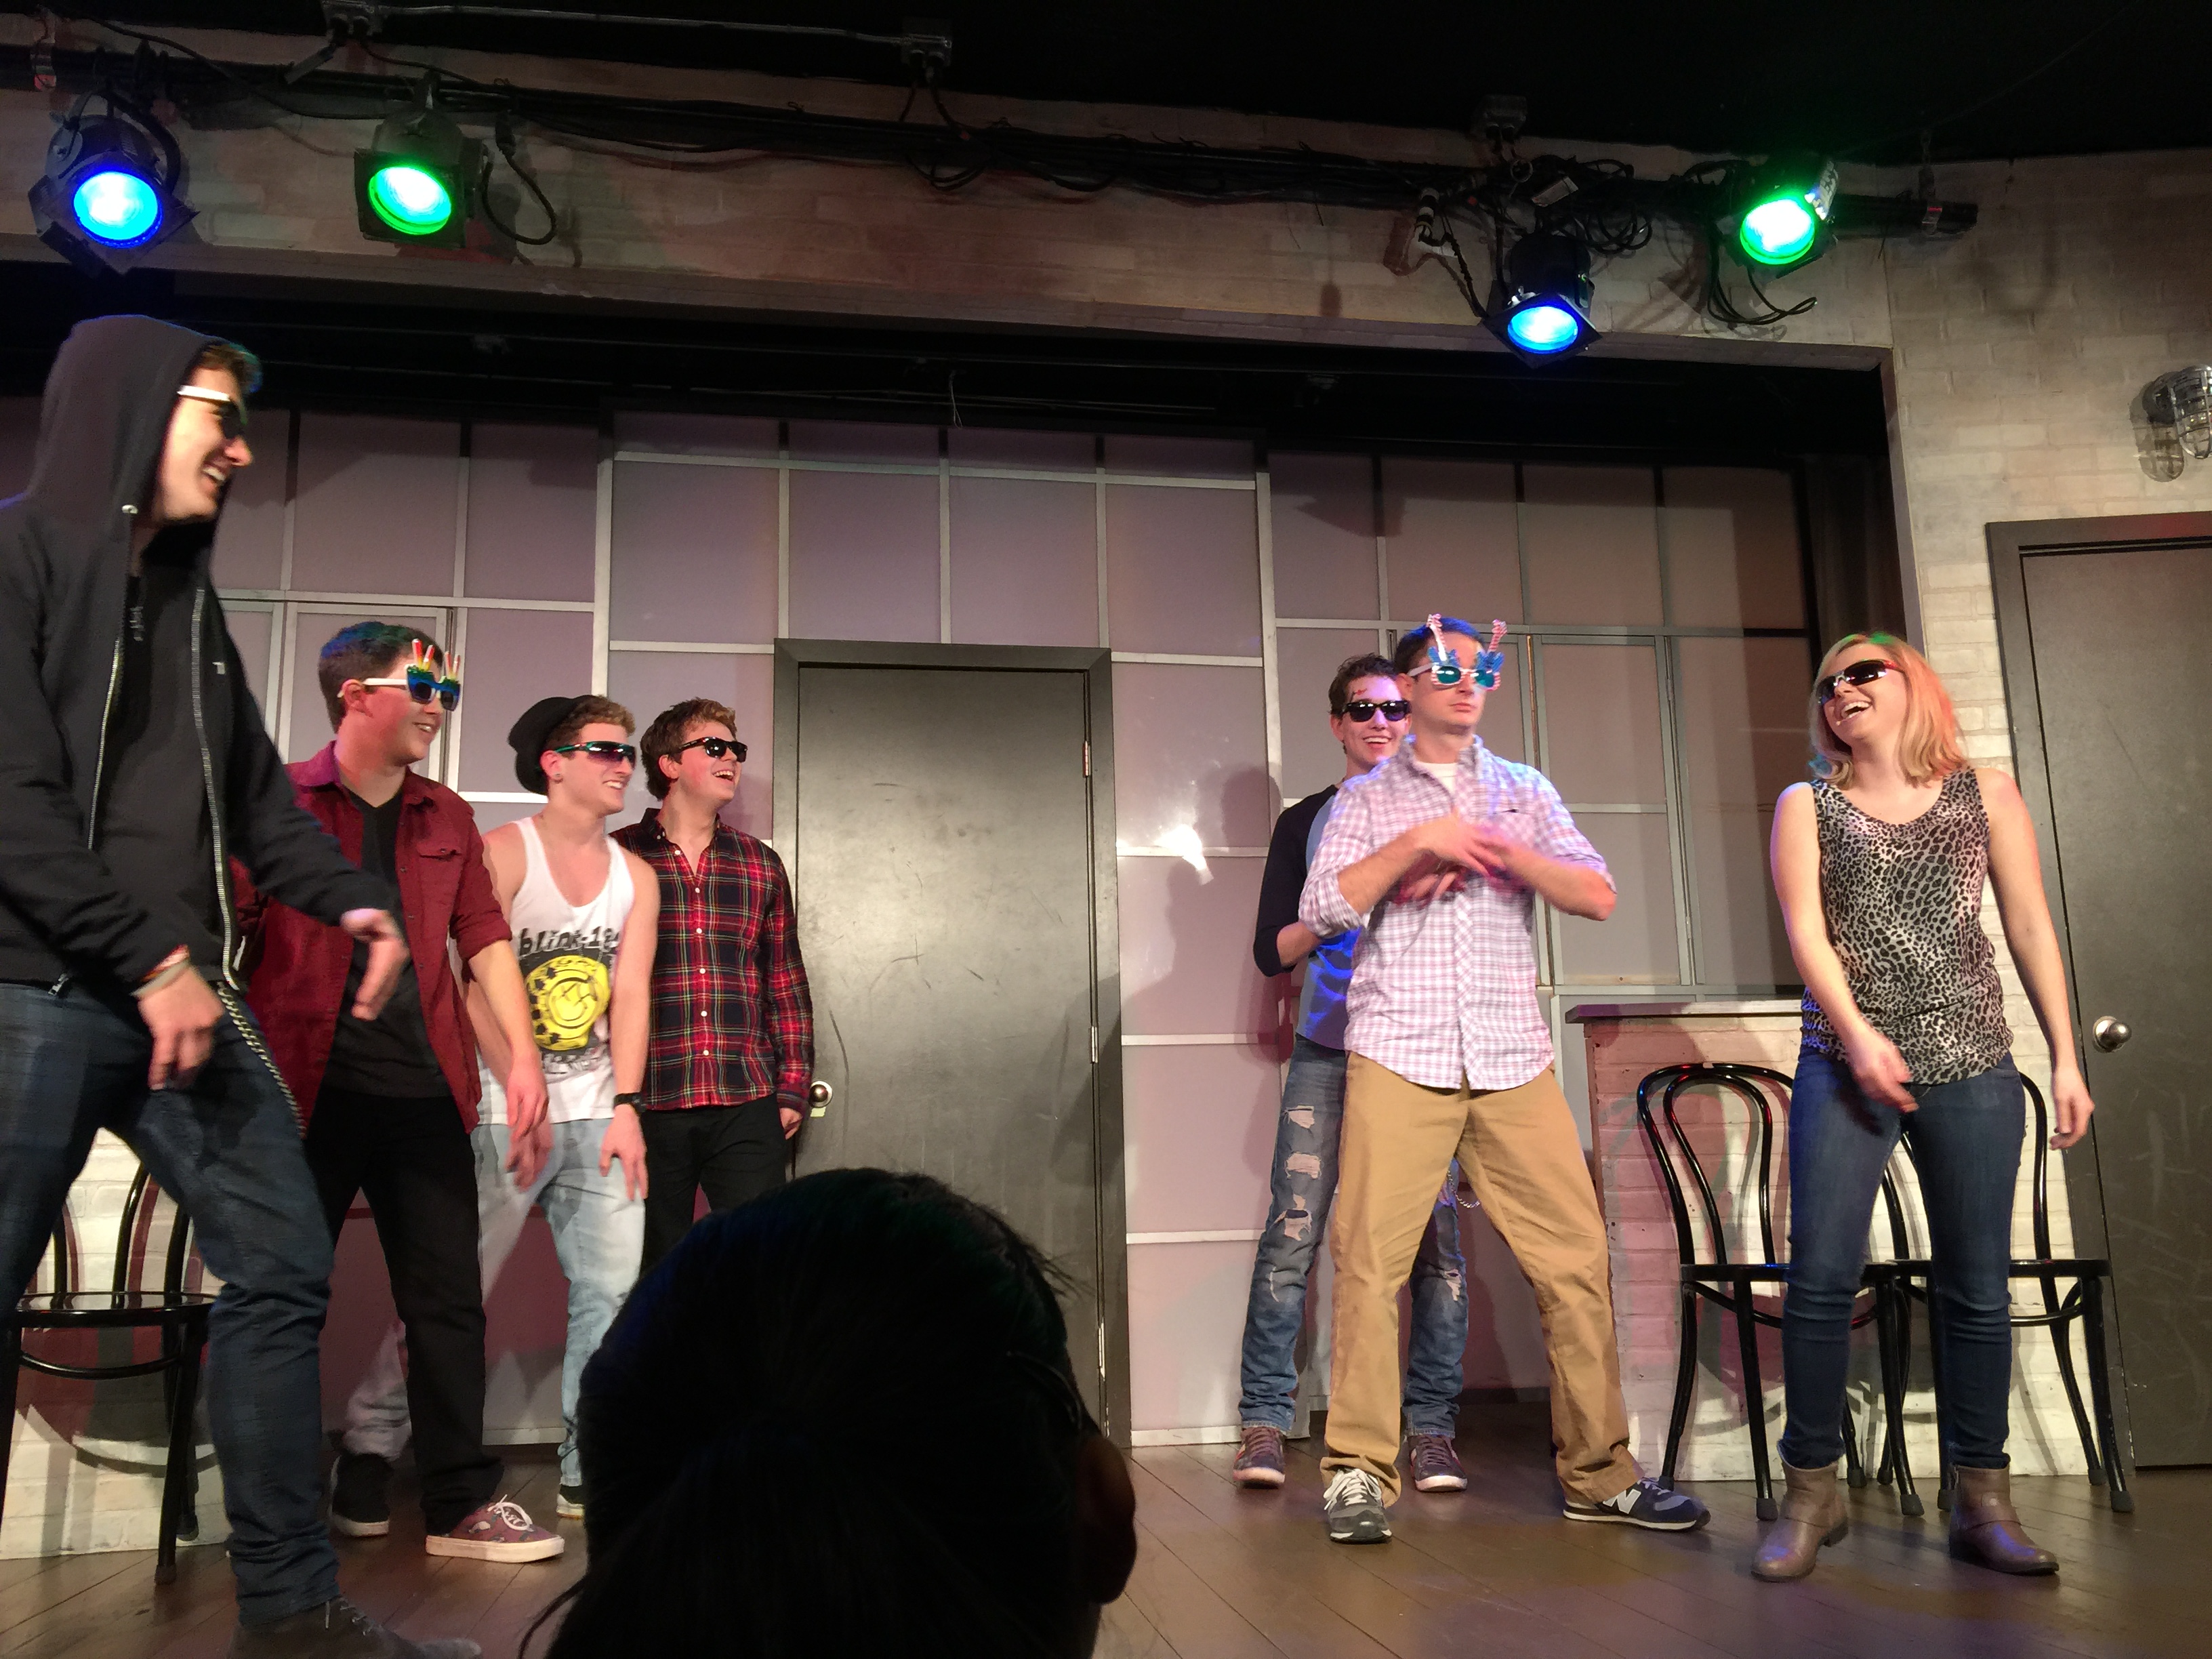 Middle School Regrets perform at Second City's 2015 open house.